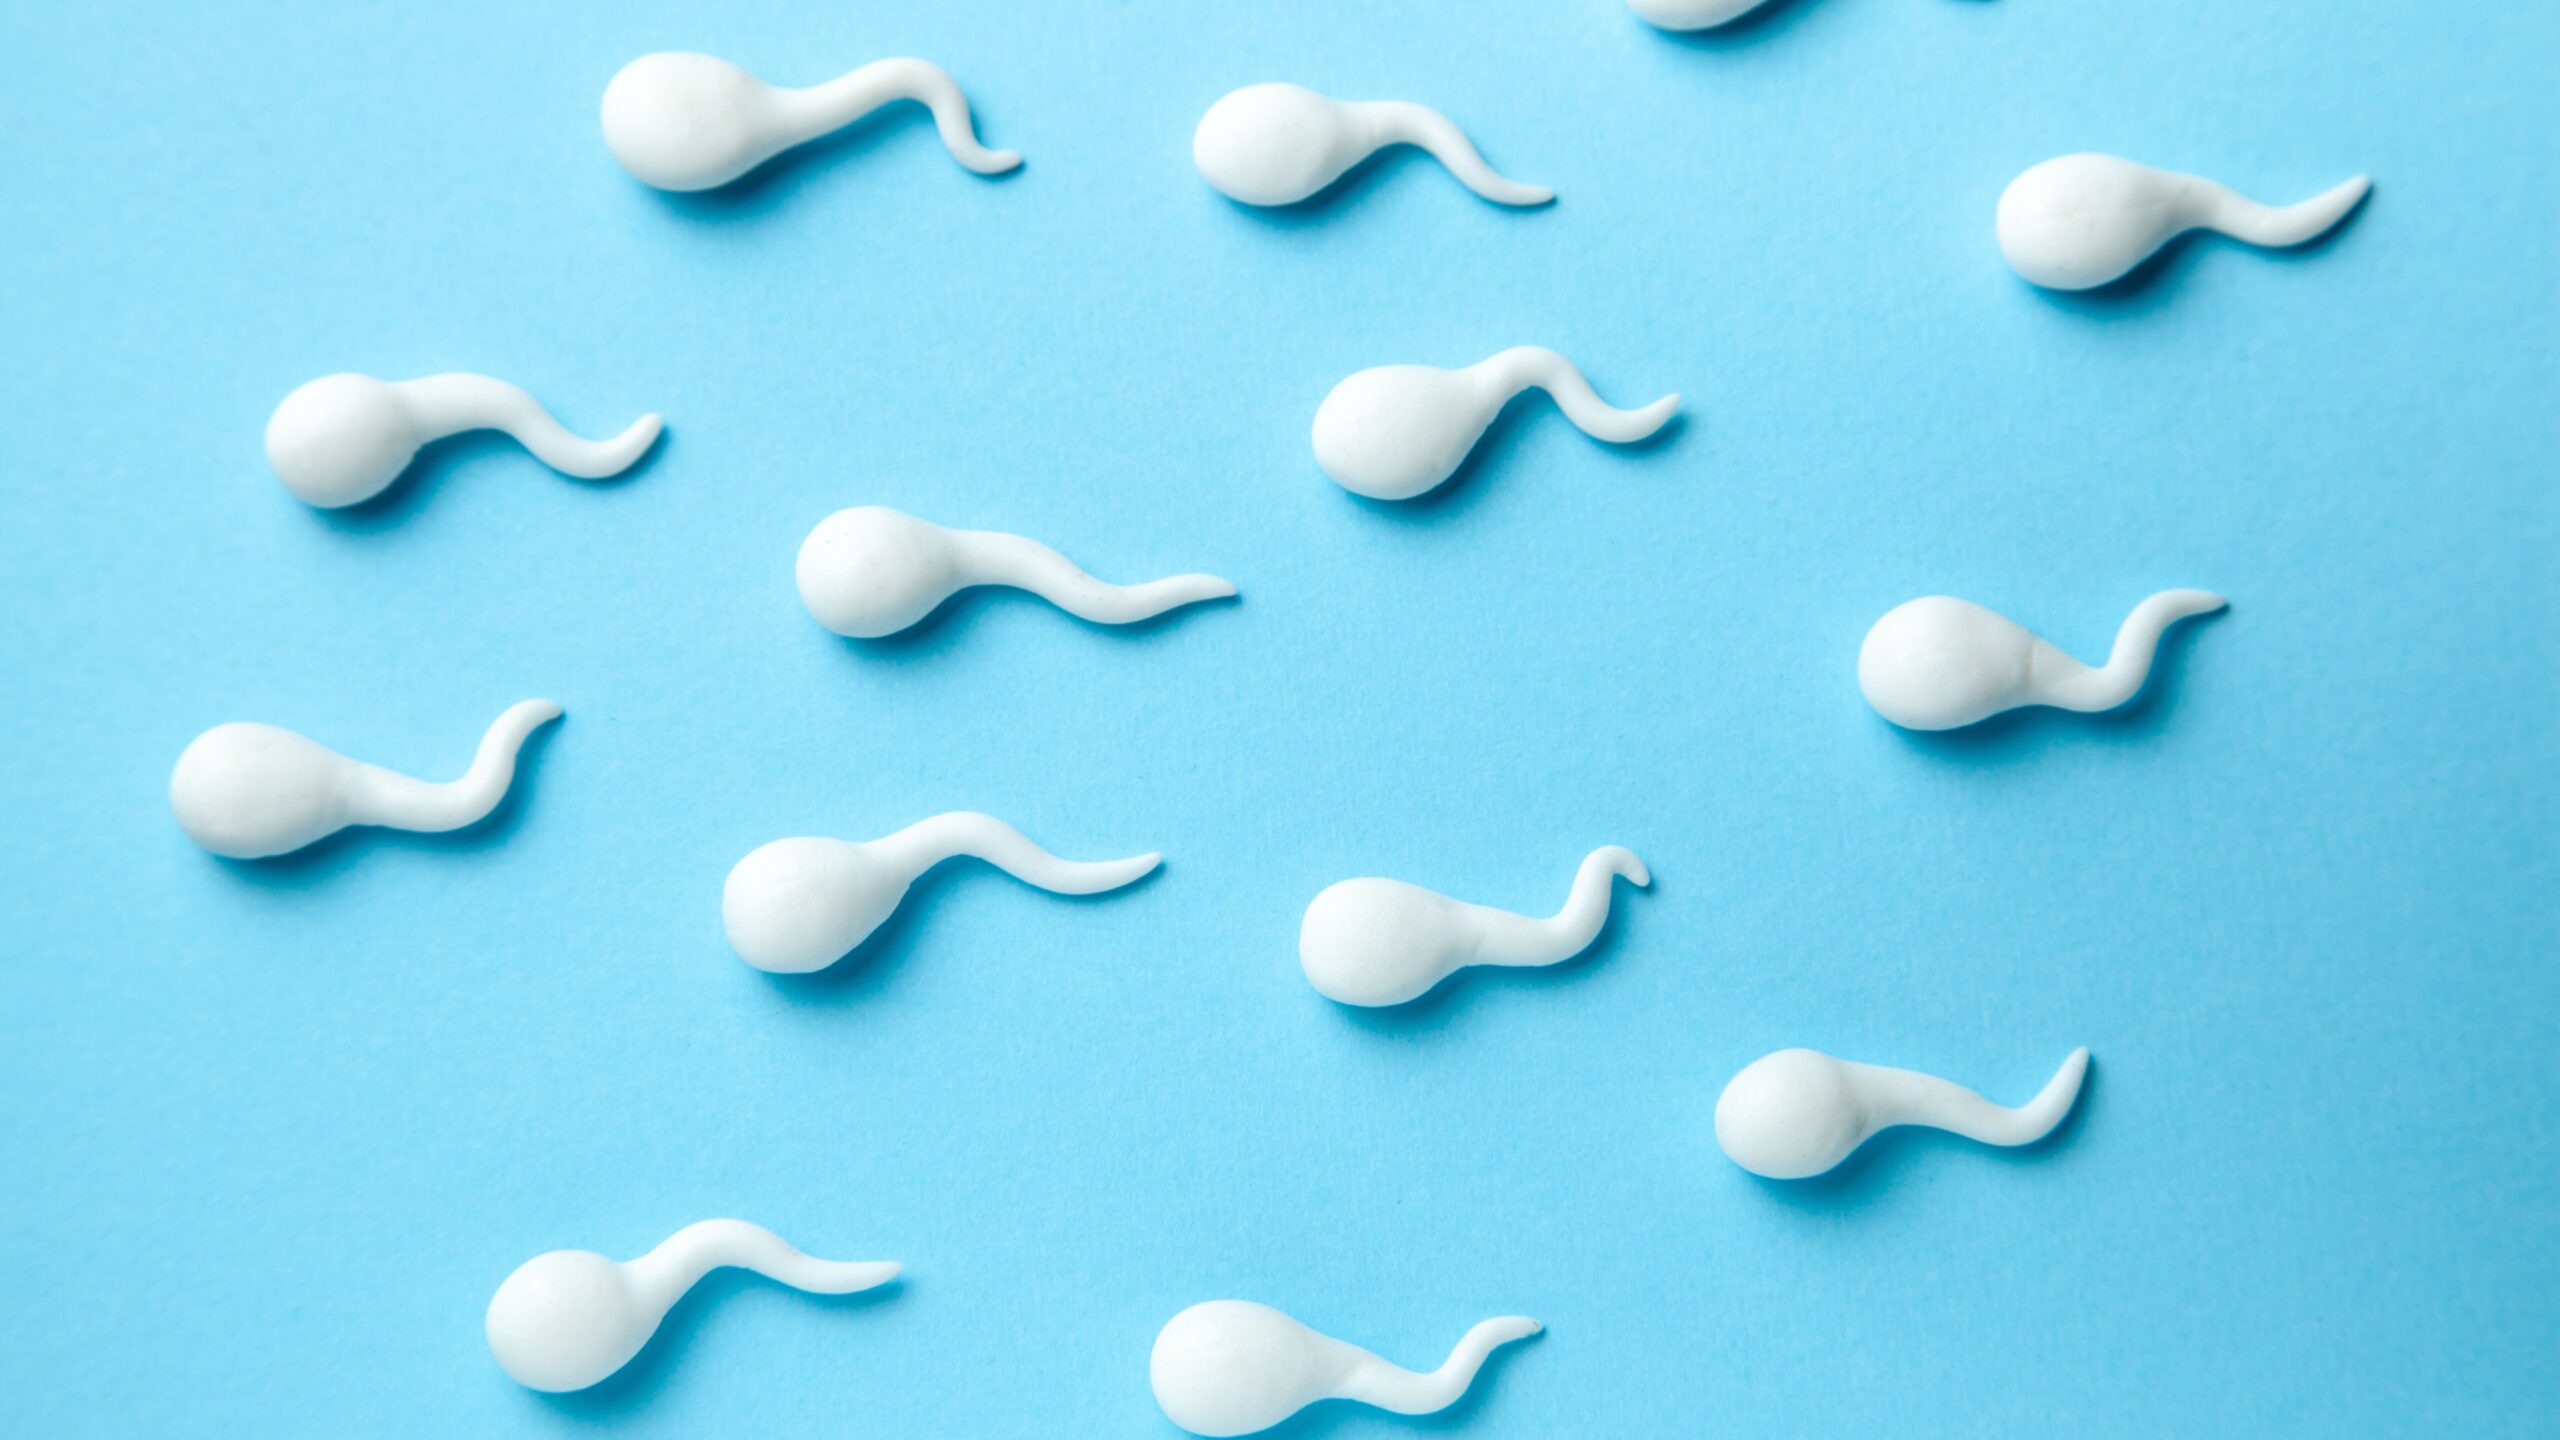 A group of sperm in front of a light blue background